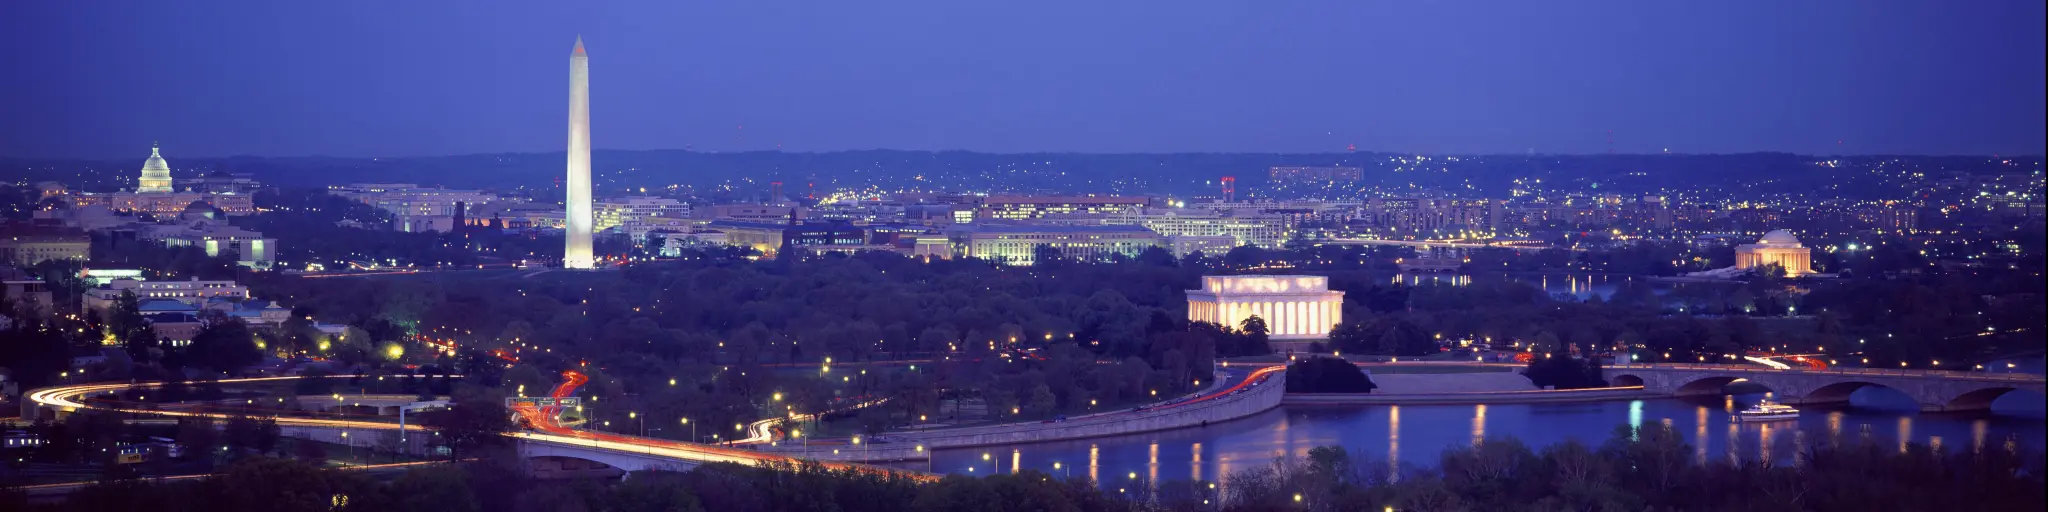 Washington DC Skyline at night, showing the Jefferson Memorial, U.S. Capitol, Washington Monument, and Lincoln Memorial.